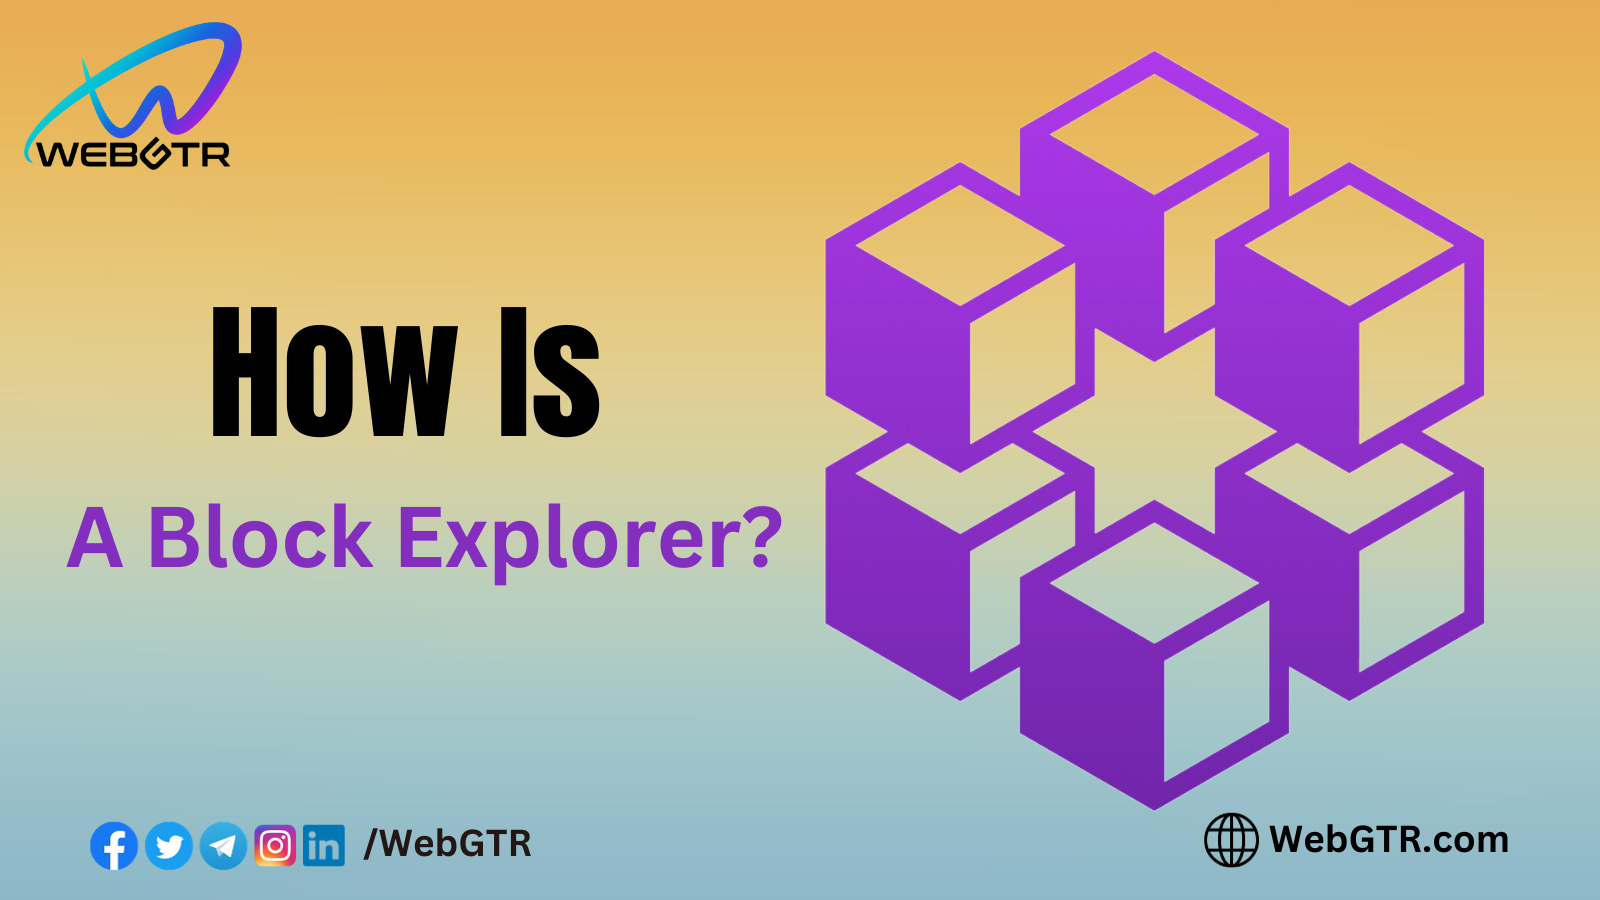 What is a Block Explorer?